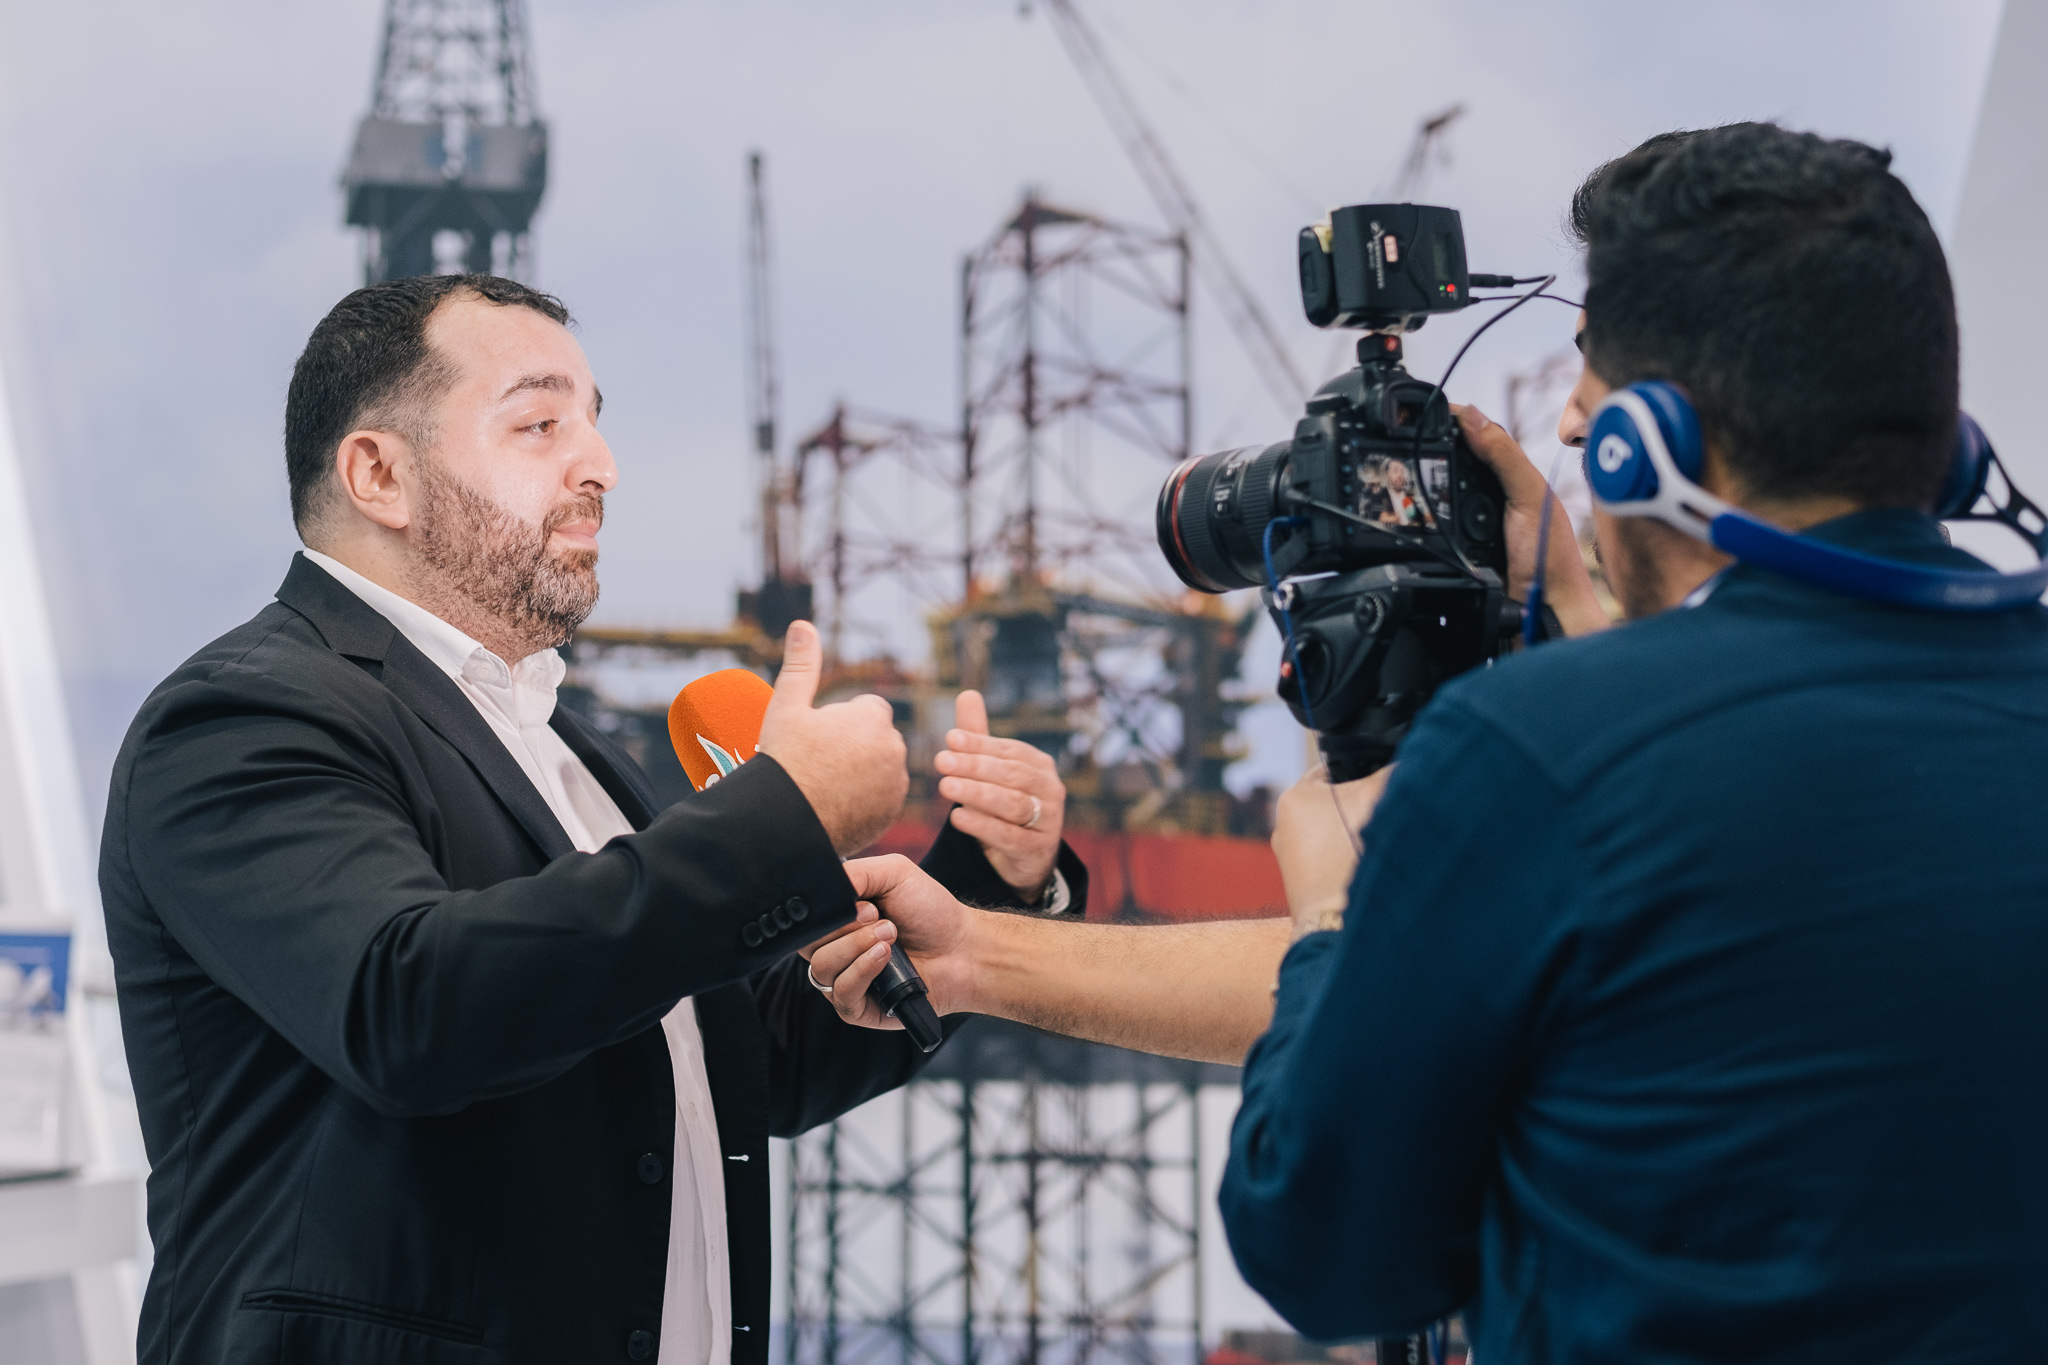 Sherpa Communications supports IEC Telecom and its partners at ADIPEC 2019